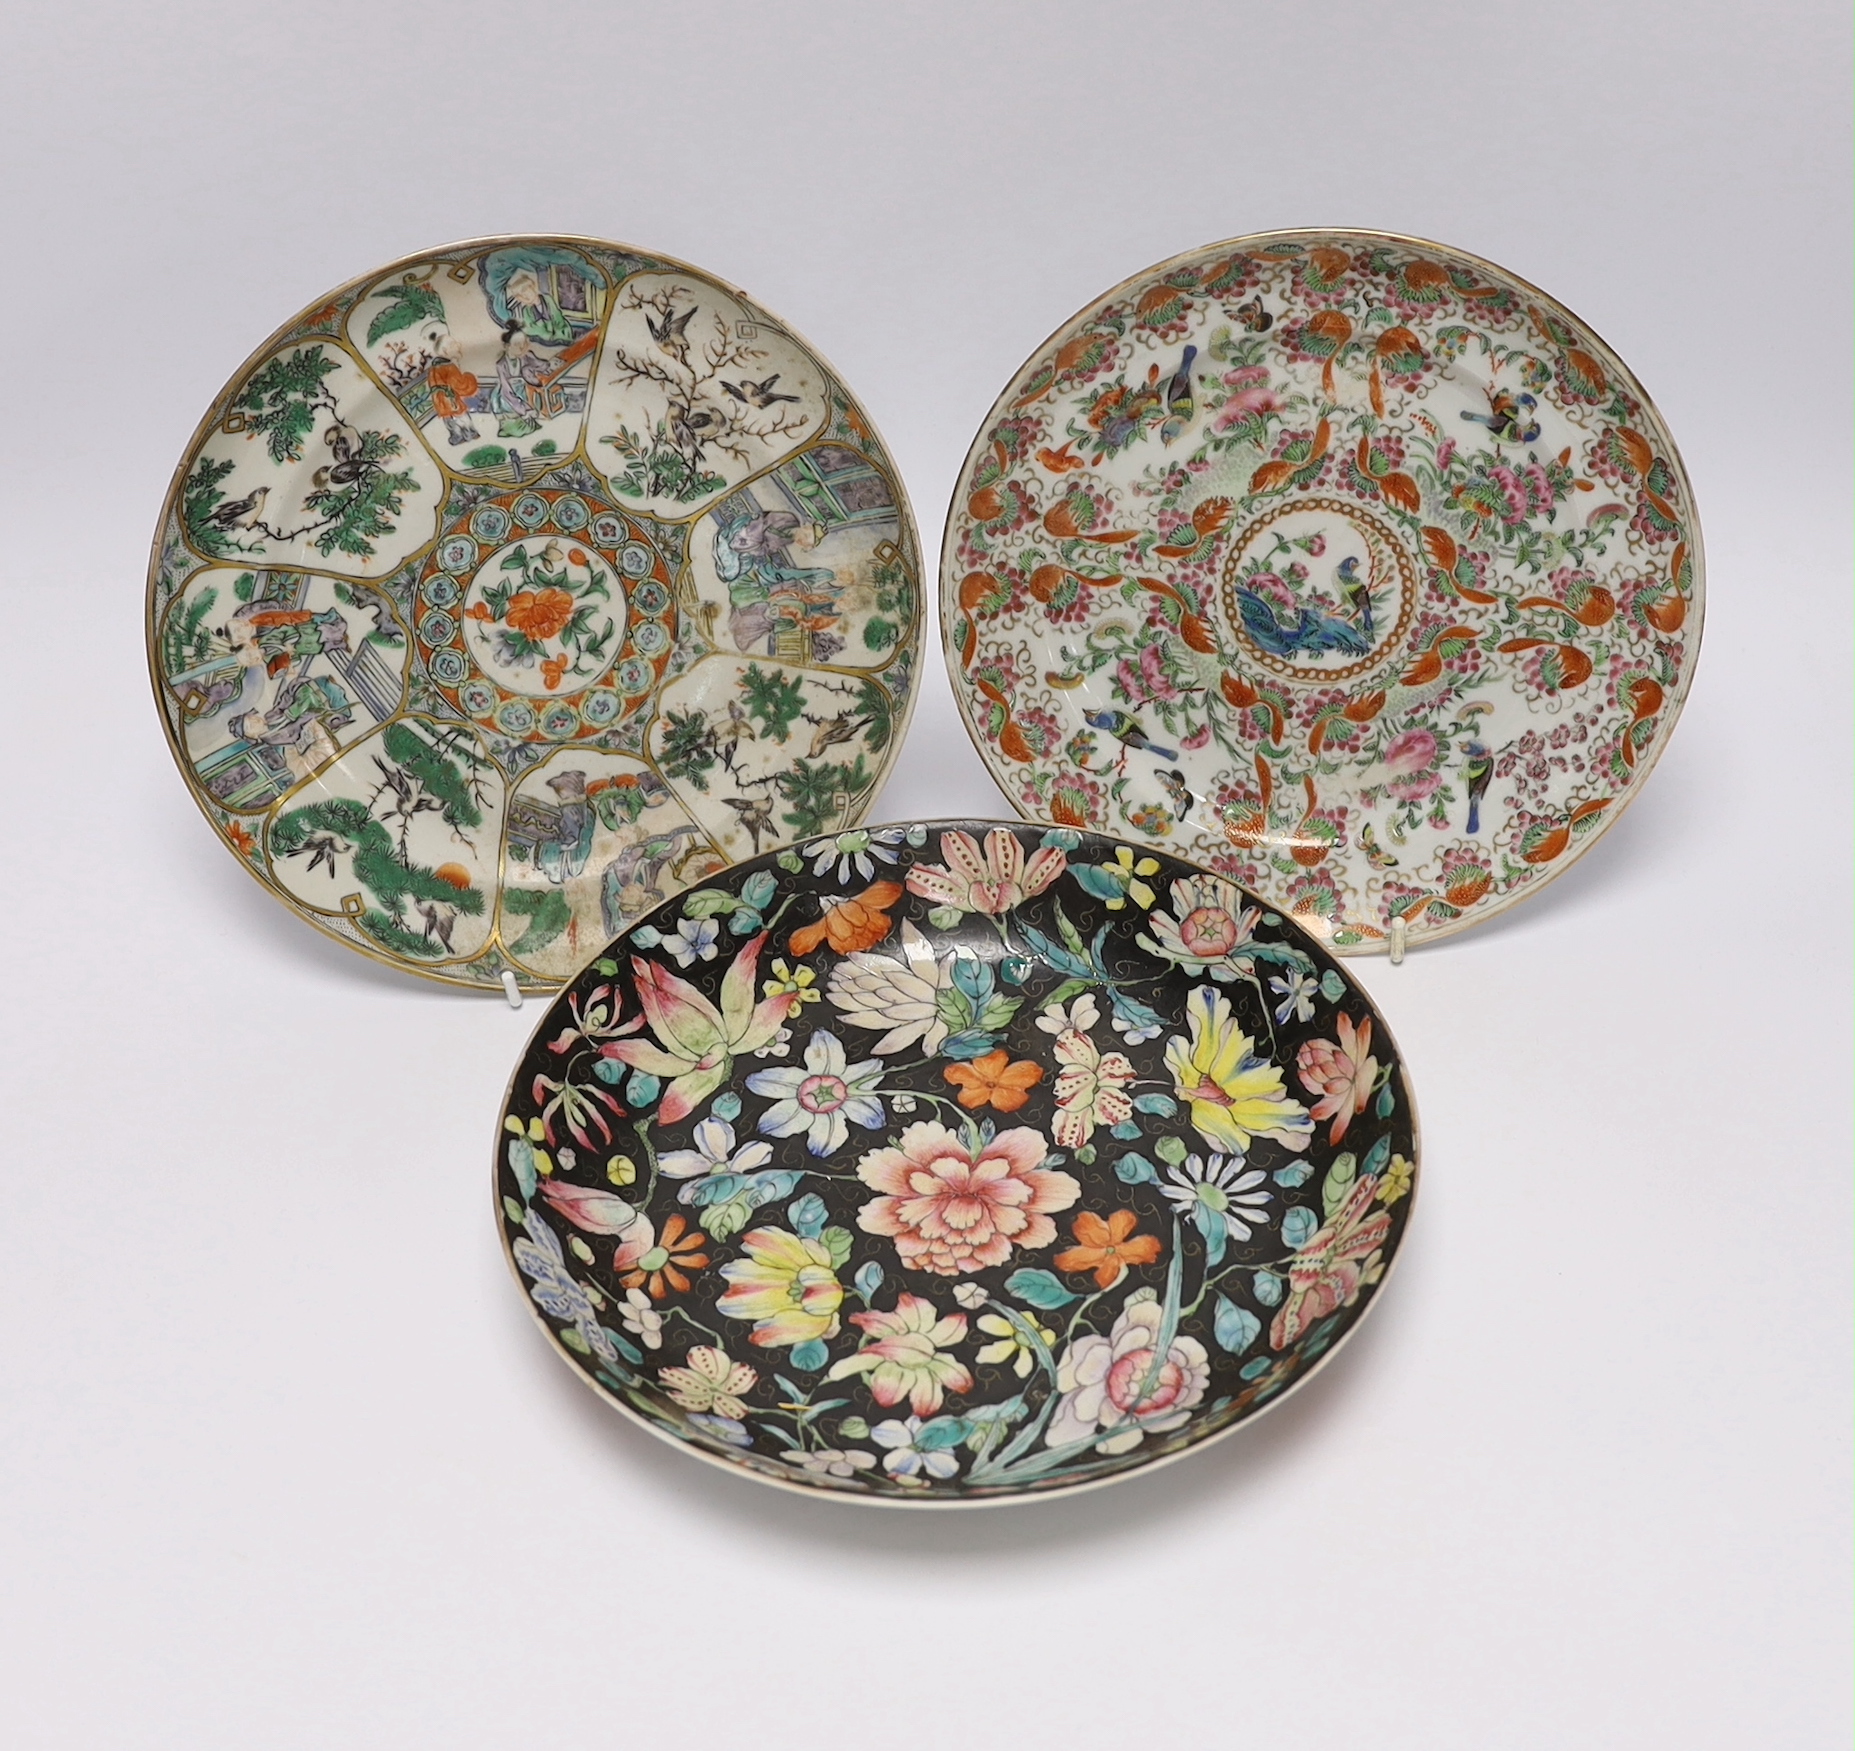 A Chinese famille noire floral dish, Qianlong mark, late 19th/early 20th century and two Chinese enamelled porcelain plates, 19th century, famille noir dish 23.5cm diameter